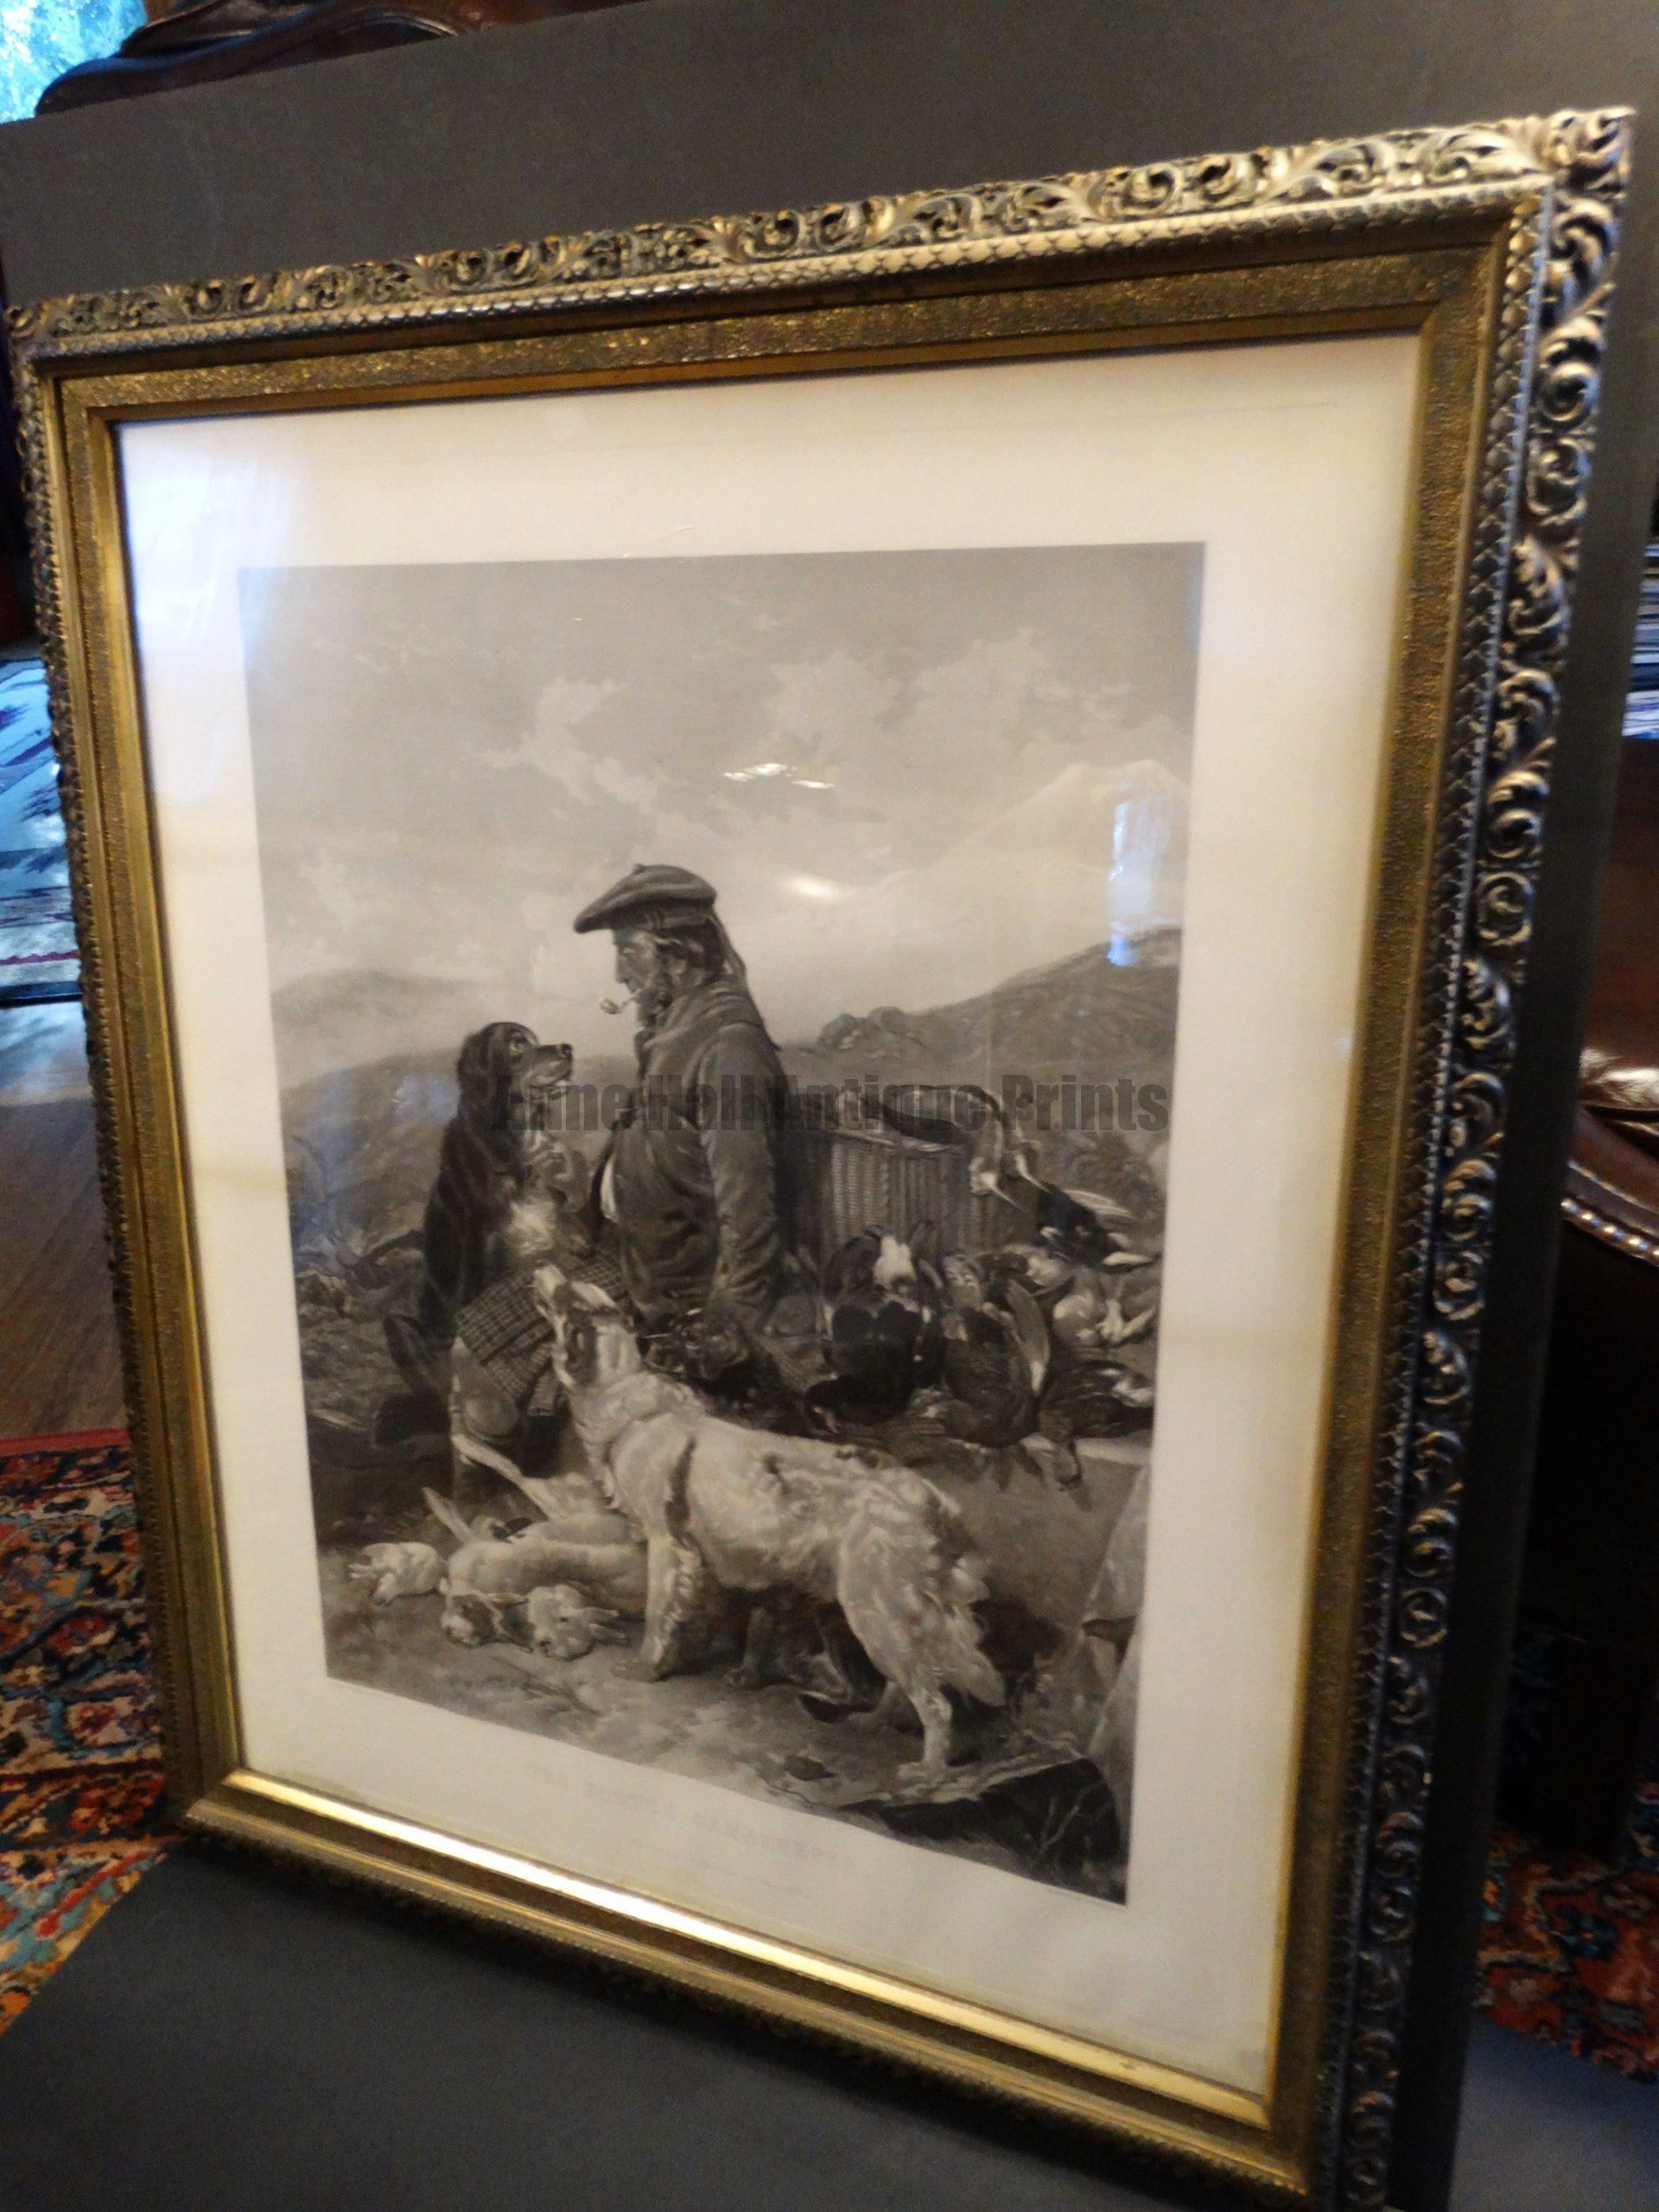 The Scotch Game-Keeper, Framed Engraving, Setter Dogs. Steel plate engraving, painted by Richard Ansdellara, Engraved by F. Stackpoole. Framed, 30.5" x 37"